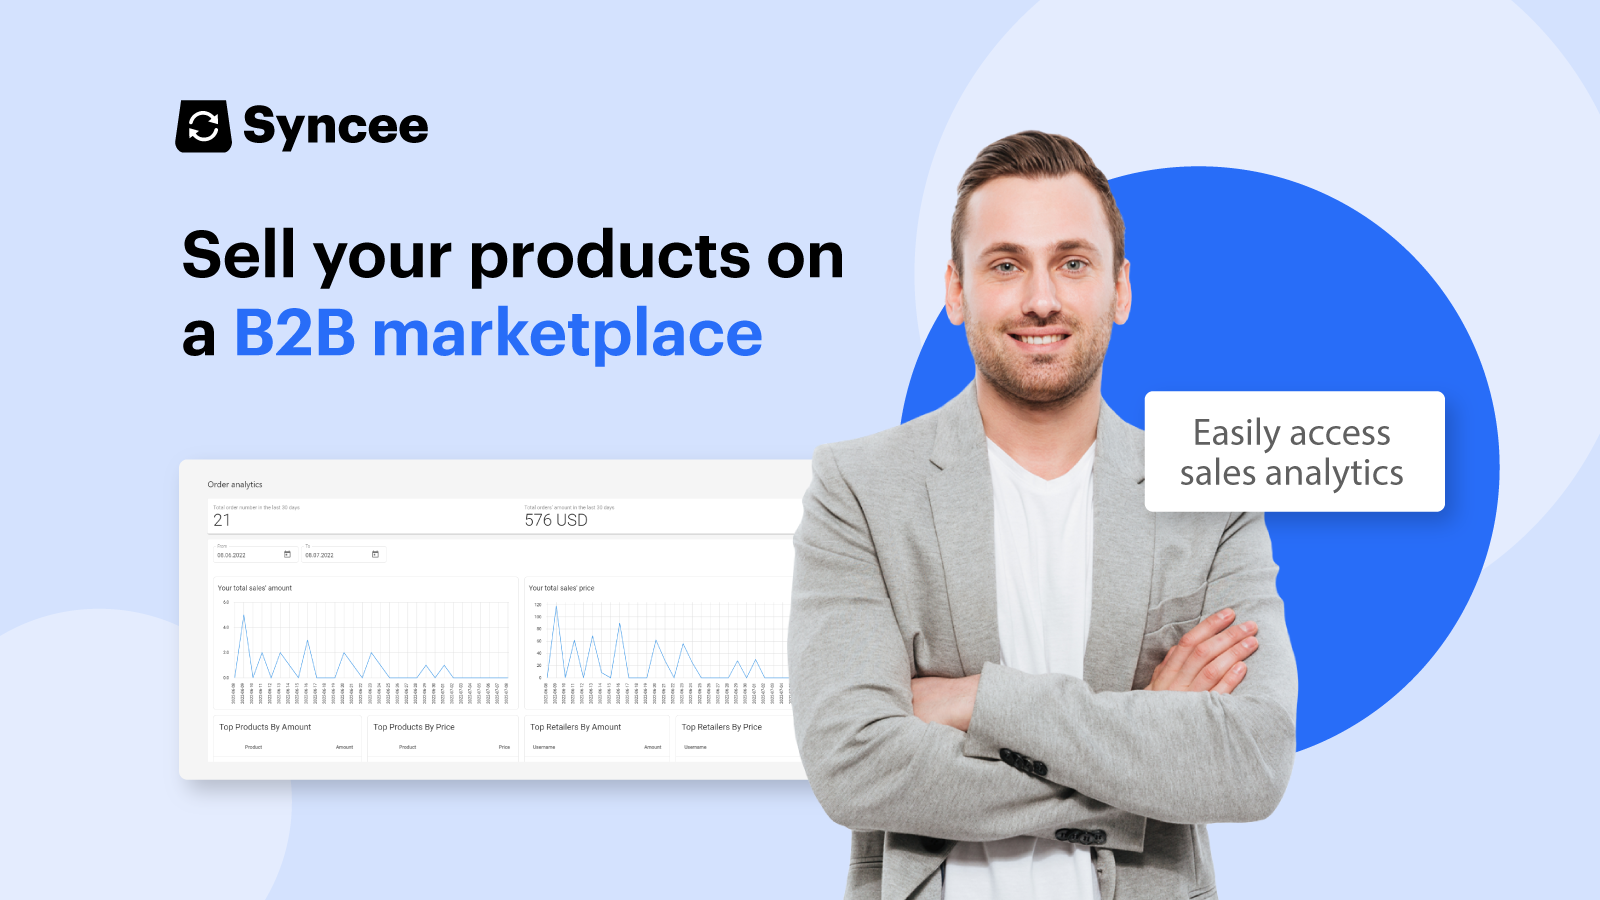 Sell your products on a B2B marketplace